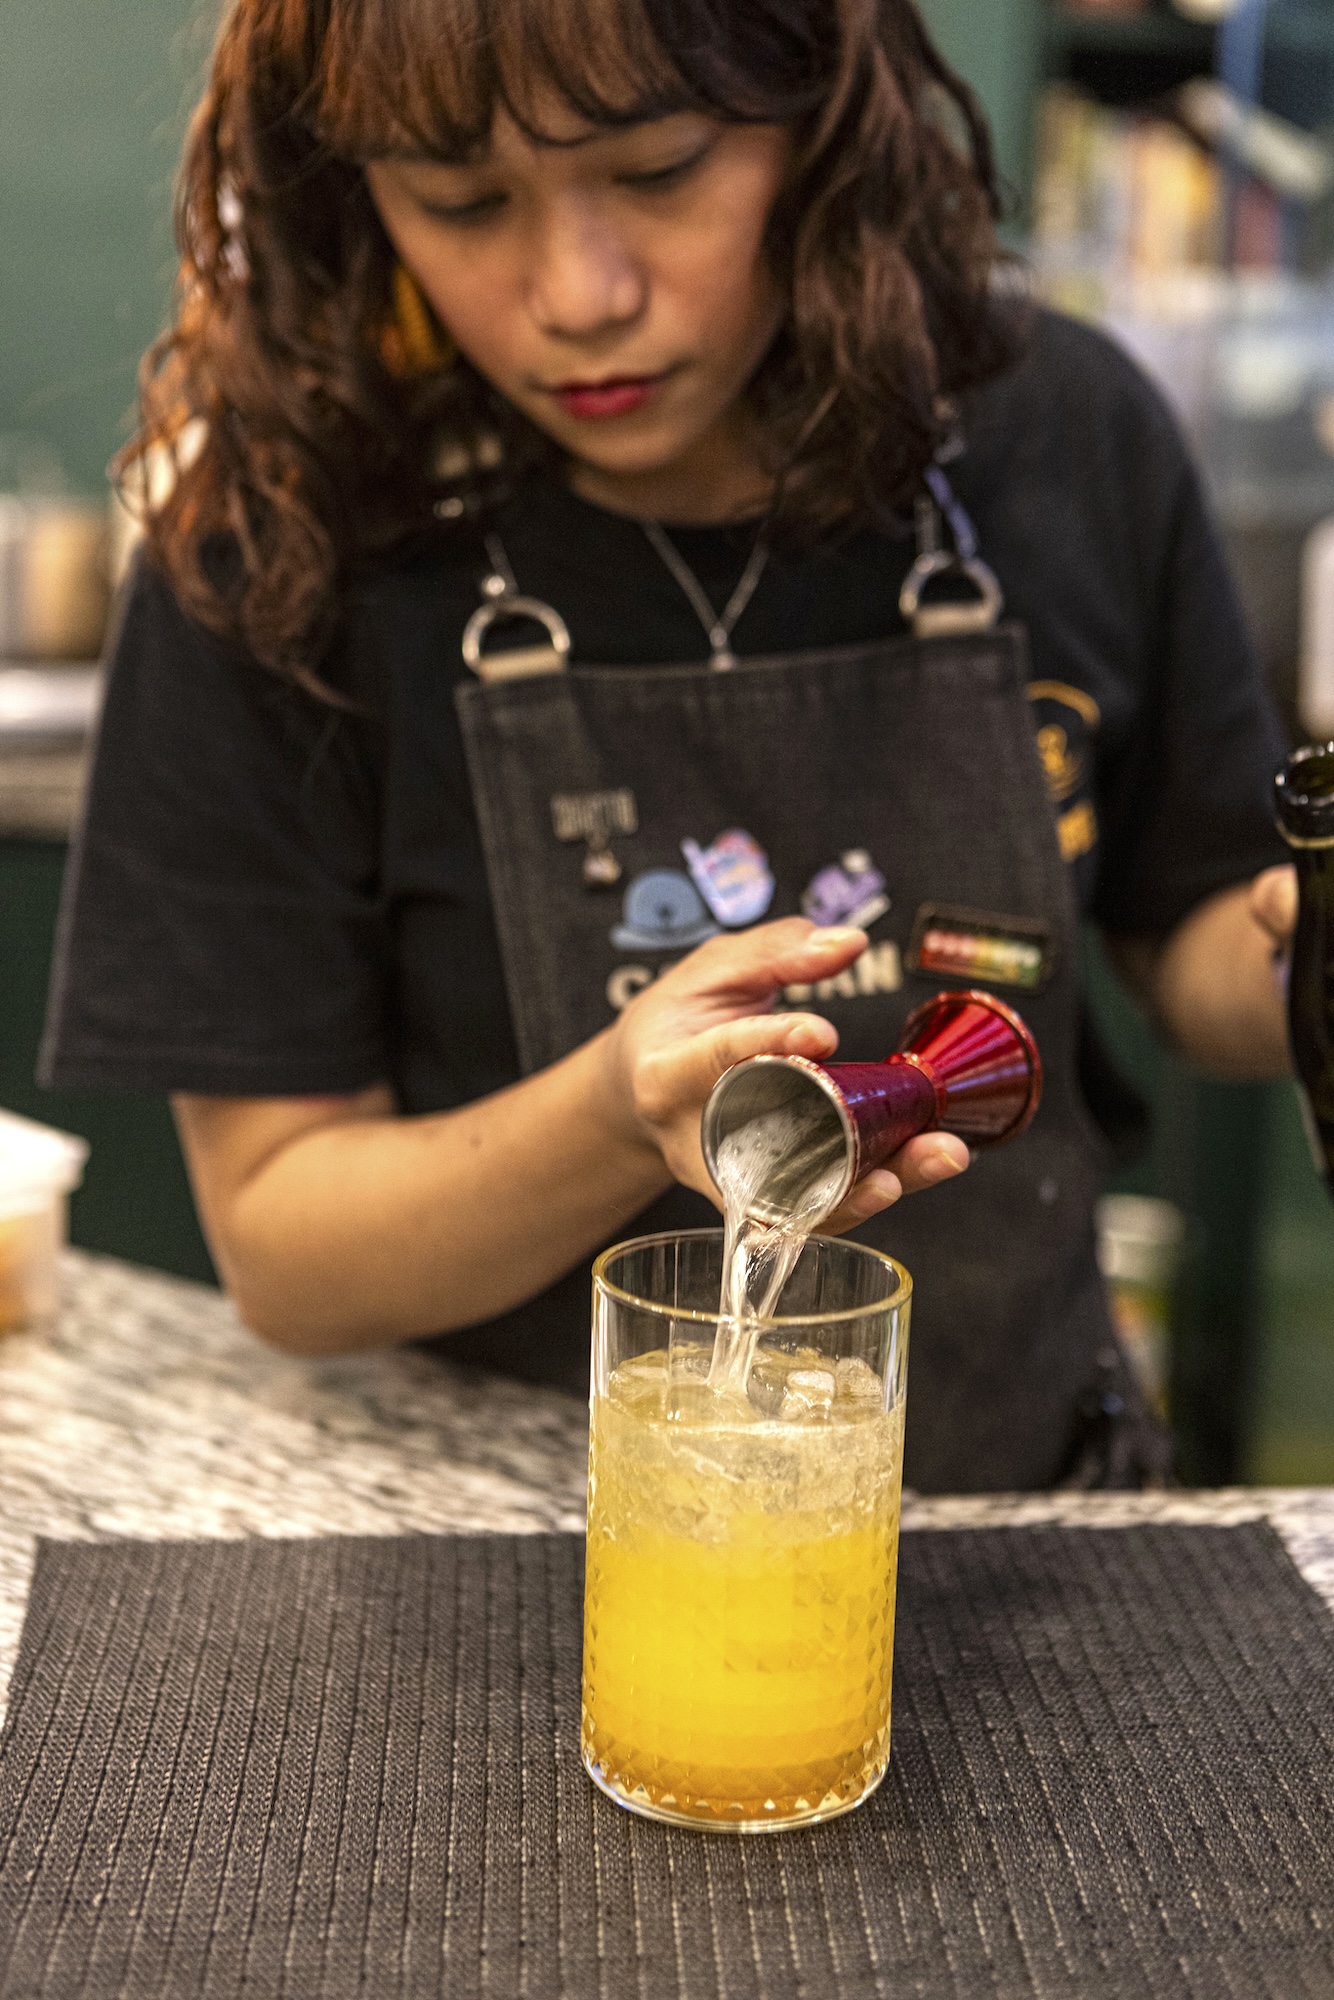 The Garden Sangria is prepared with a mix of orange and tangerine syrup with a dose of Tanqueray Seville and Cointreau